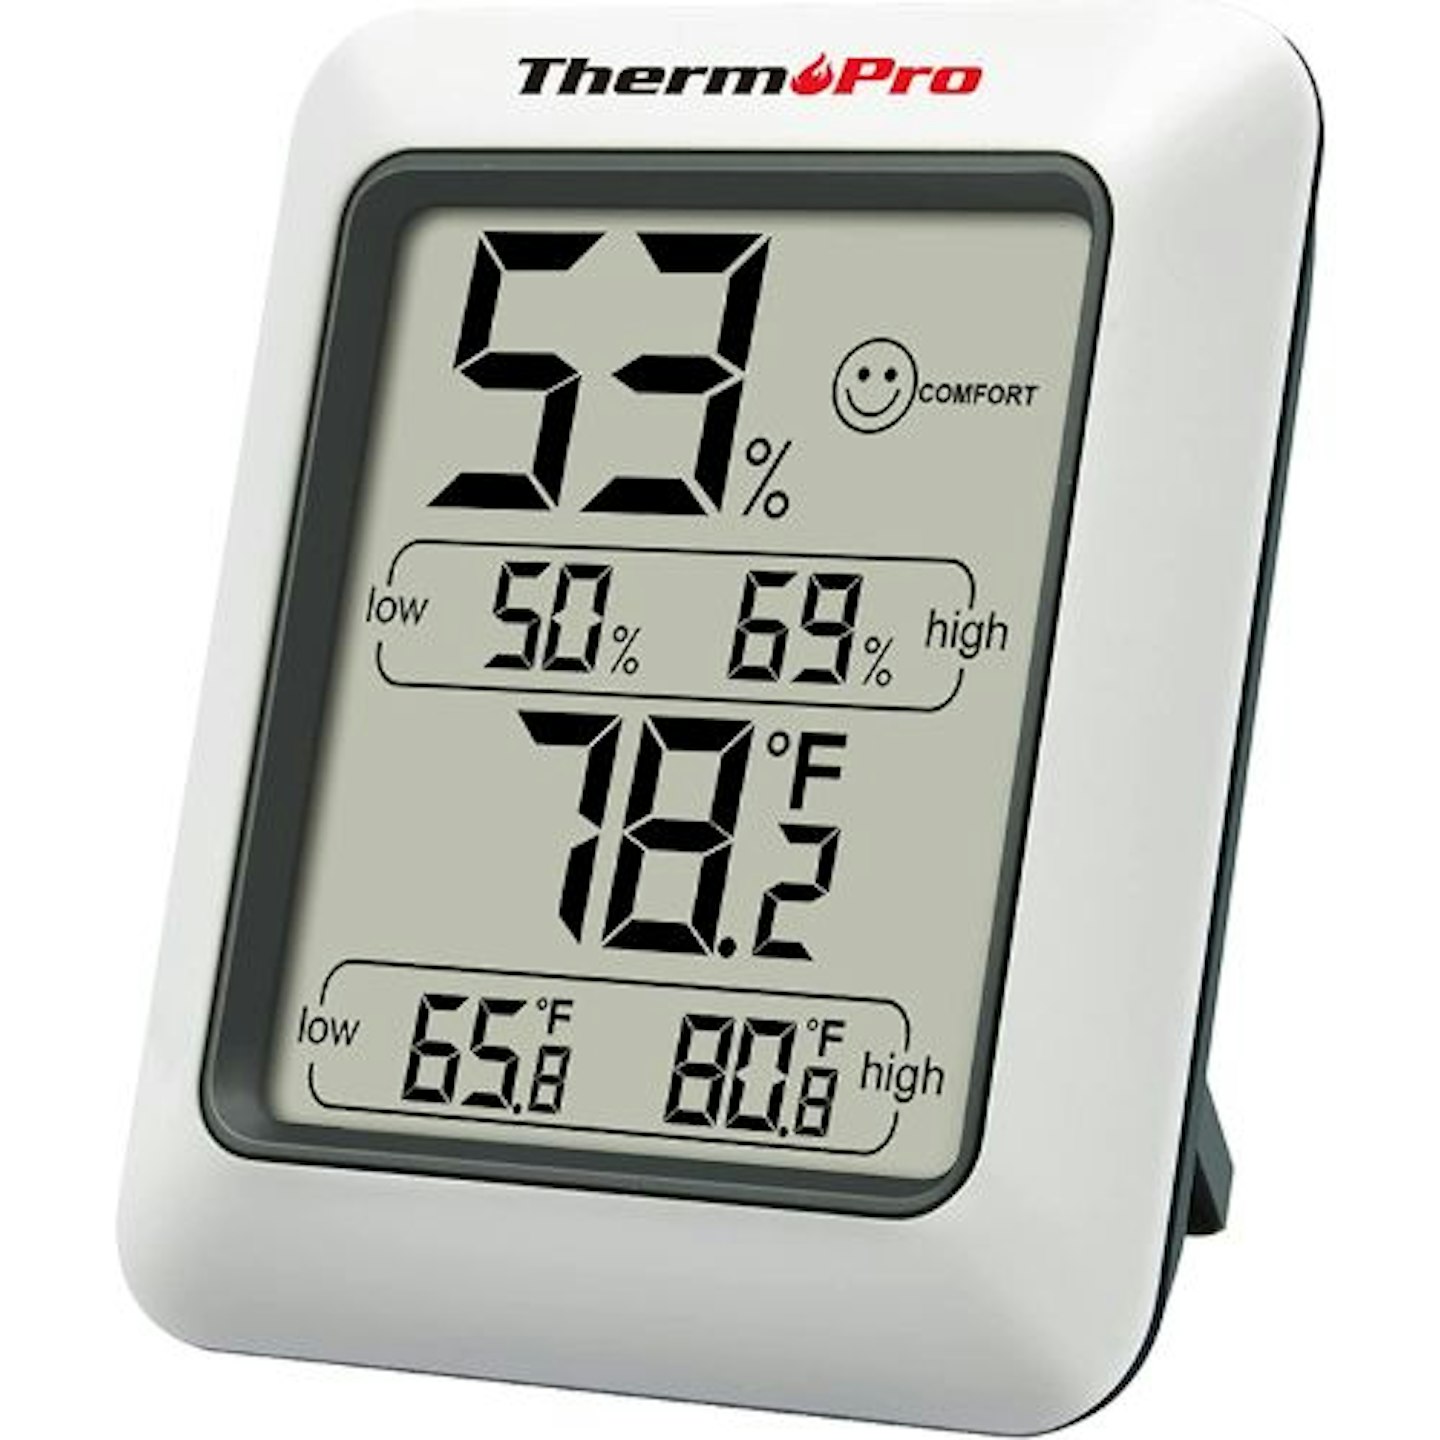 https://images.bauerhosting.com/affiliates/sites/12/motherandbaby/2022/08/ThermoPro-TP50-Digital-Thermo-Hygrometer-Indoor-Thermometer.jpg?auto=format&w=1440&q=80